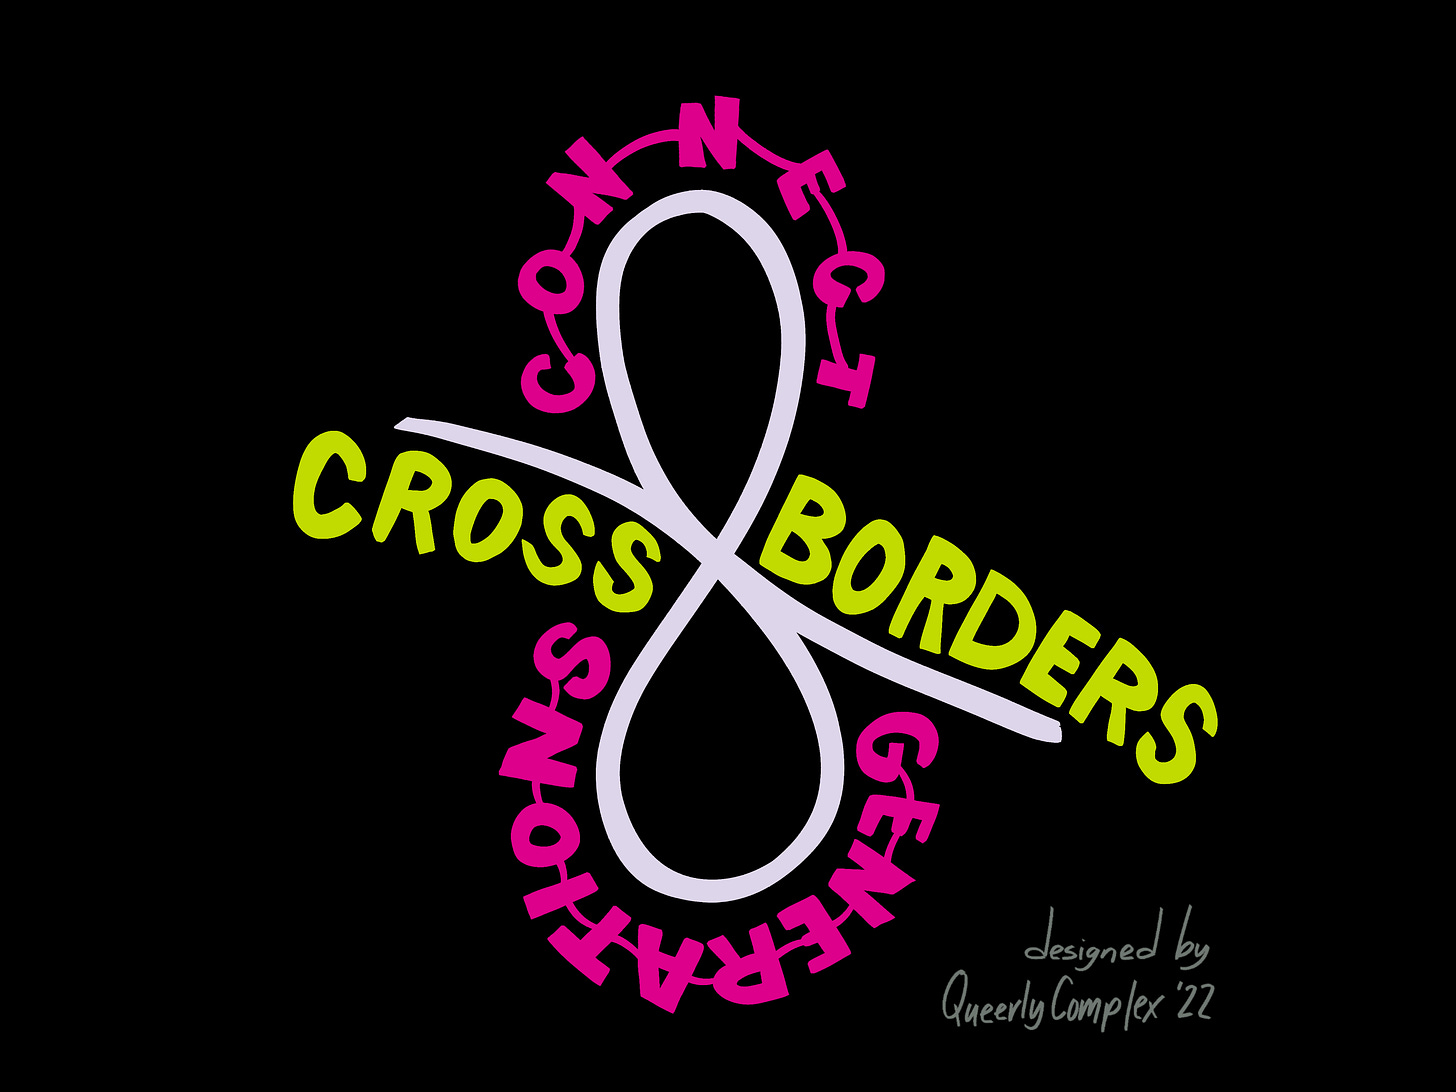 "Connect generations, cross borders" in hand lettering with a white symbol that looks like an figure eight with a line extending out either side of it in the middle. Designed by Queerly Complex. 